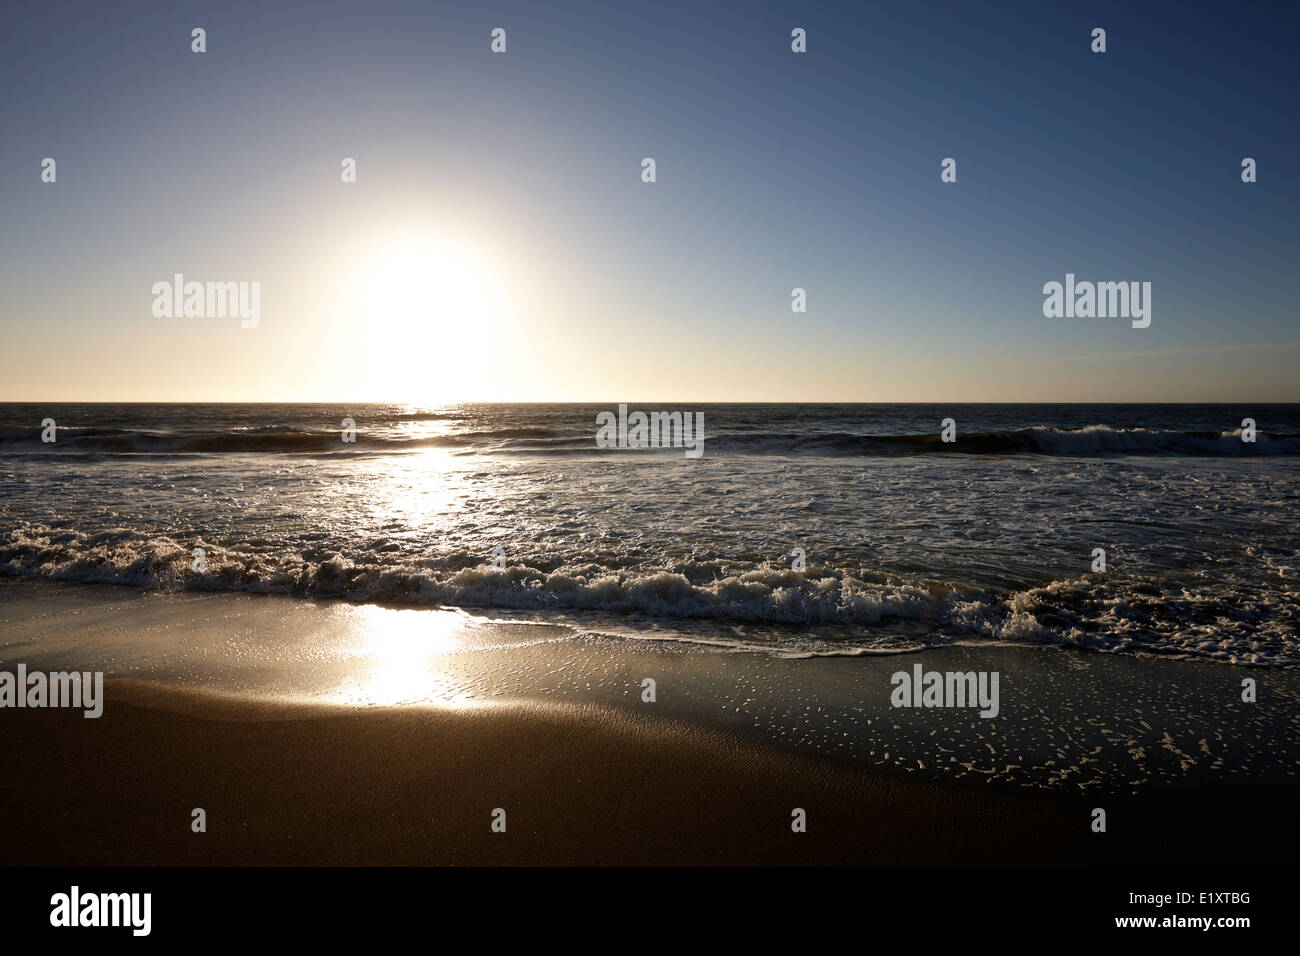 sun setting over sandy beach on the pacific ocean los pellines chile Stock Photo